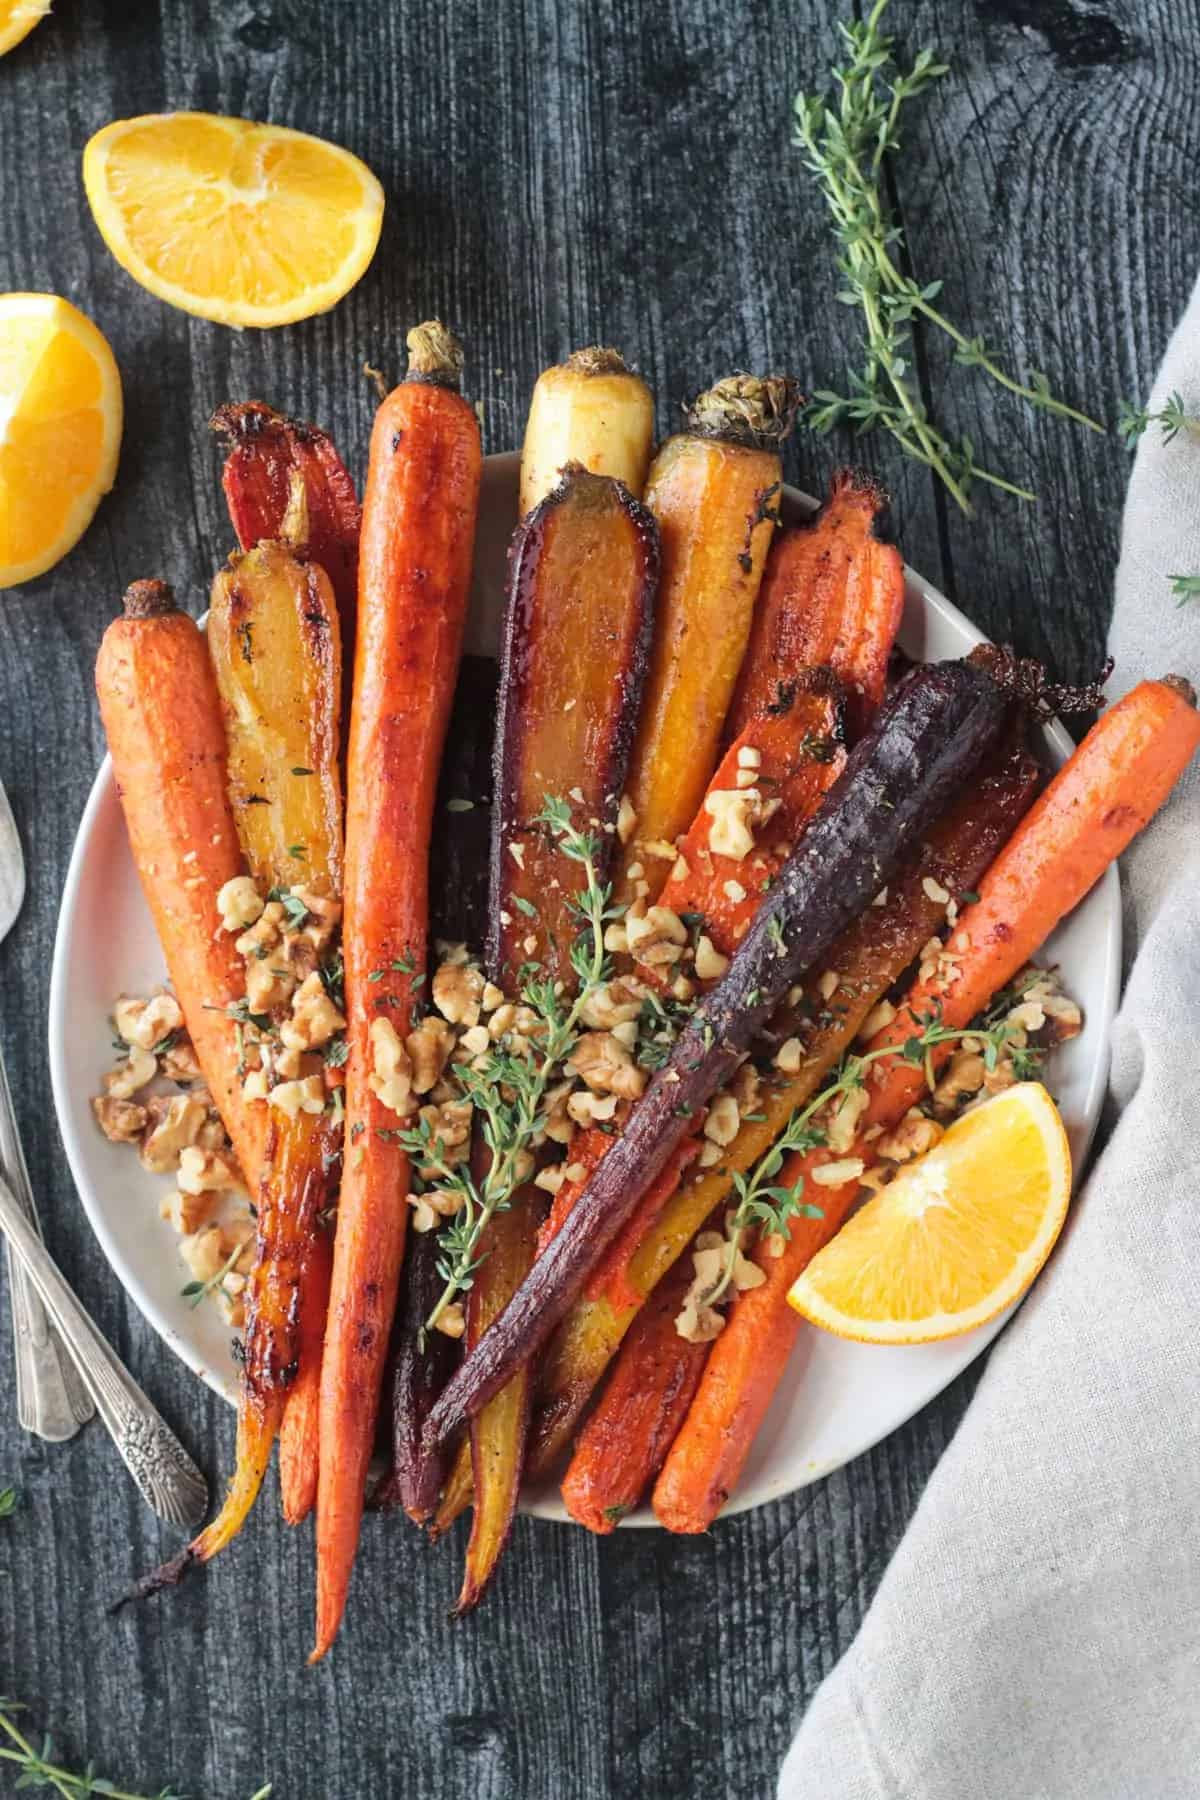 Roasted whole rainbow carrots with walnuts and thyme on top.